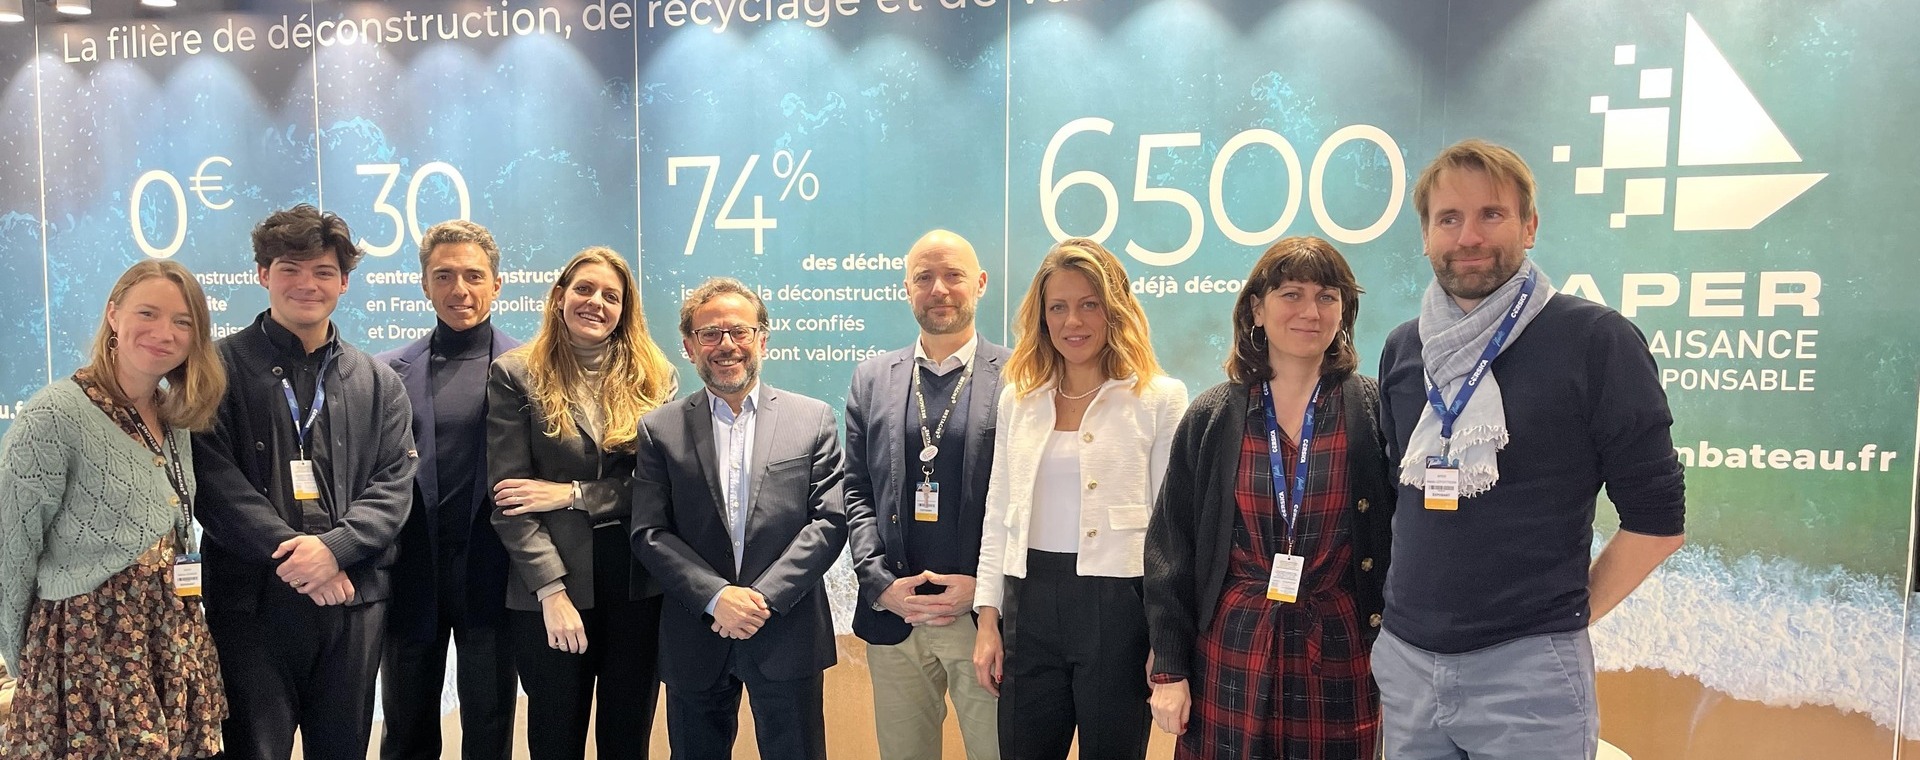 Recycling pleasure boats: collaboration agreement under consideration between the REFIBER programme and the French APER consortium